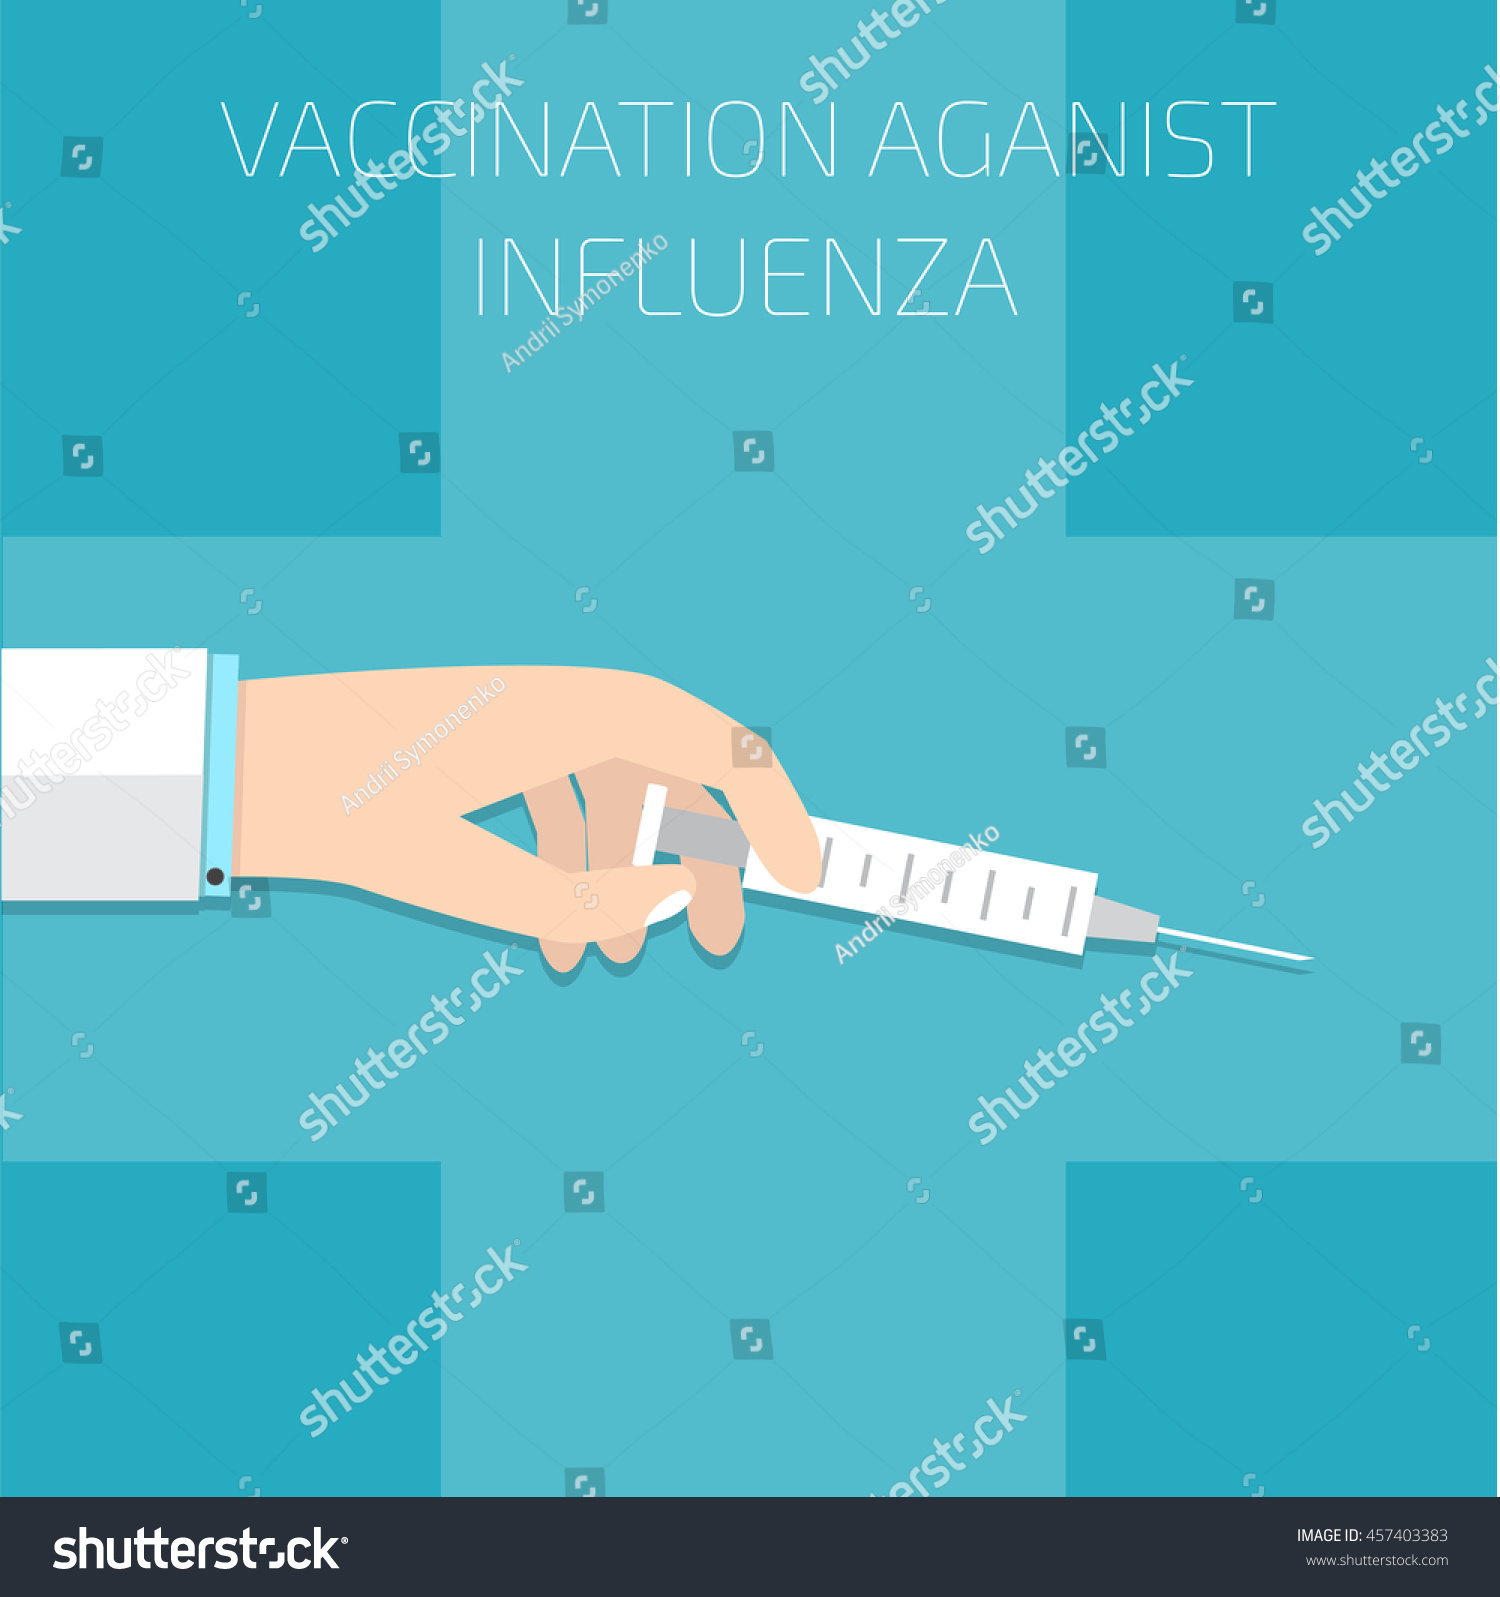 Vaccination against influenza doctor with syringe two #457403383